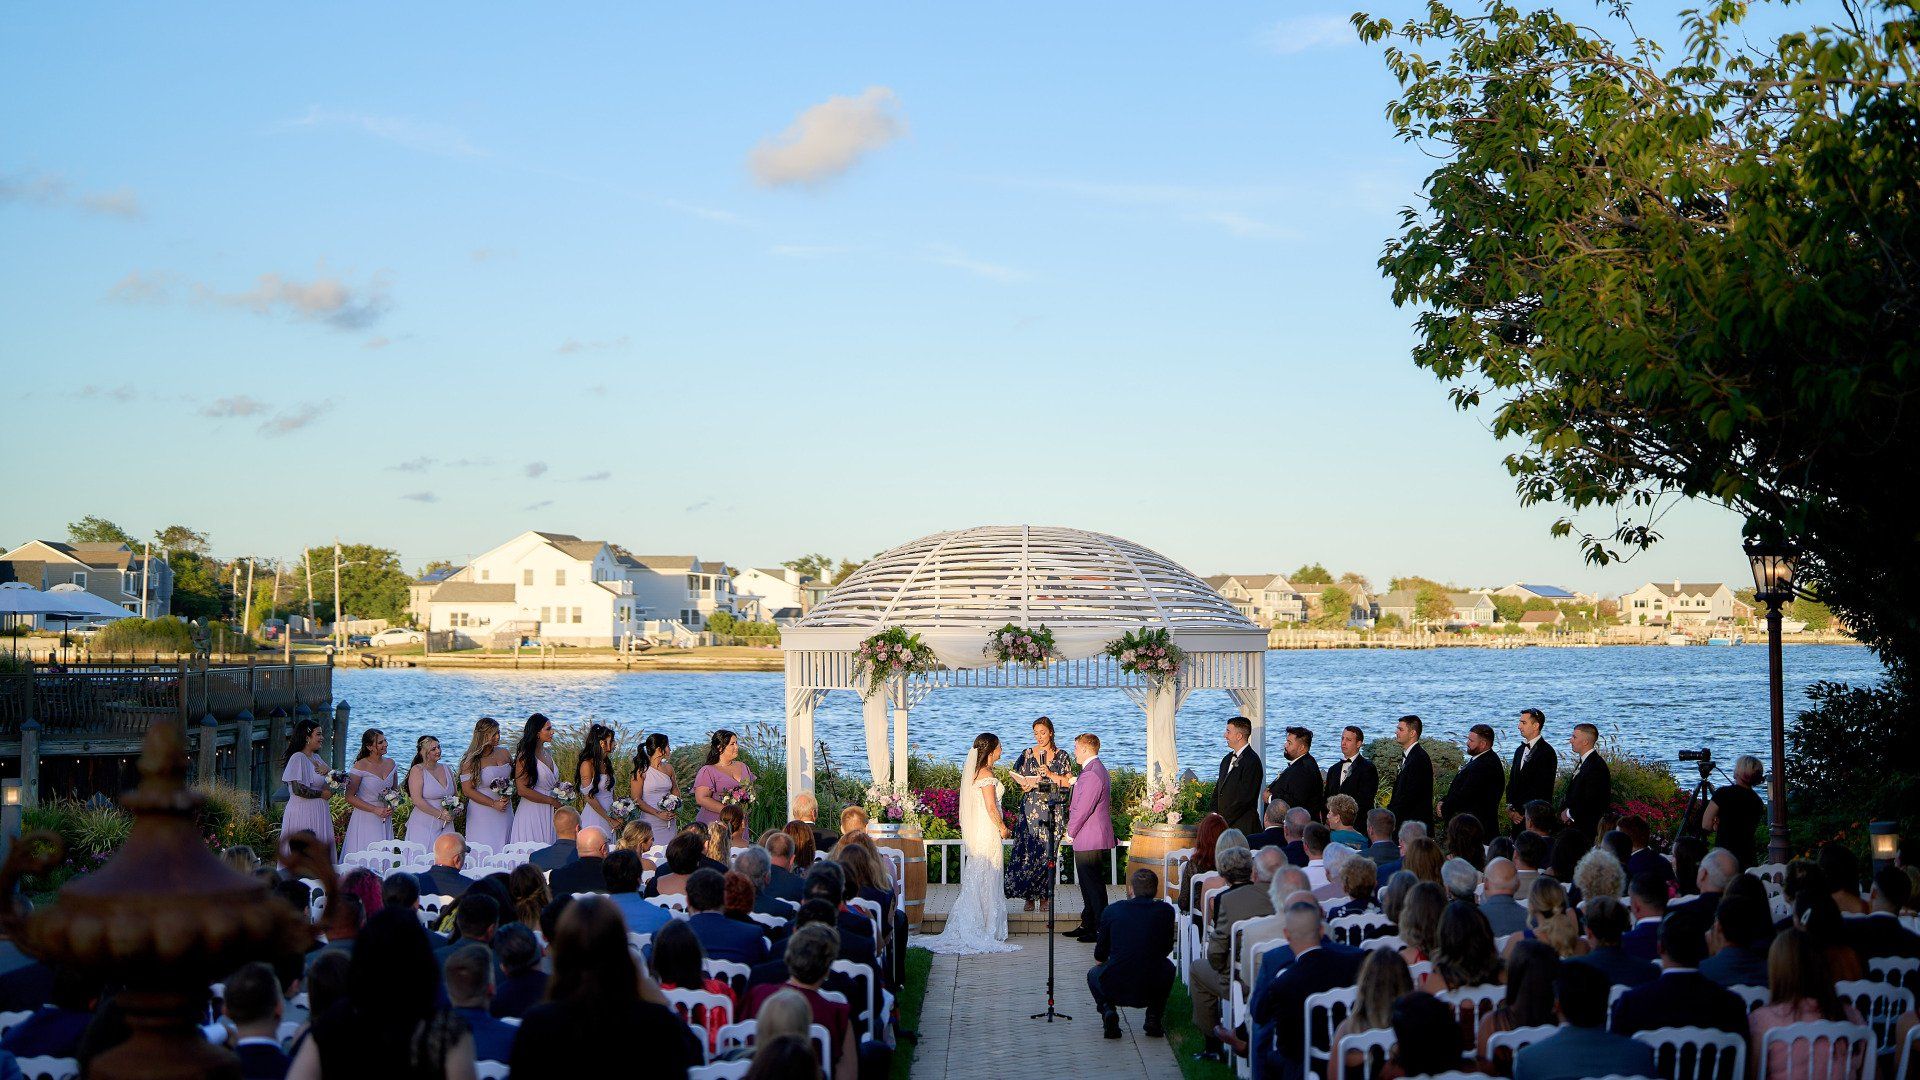 a wedding ceremony is taking place in front of a body of water .